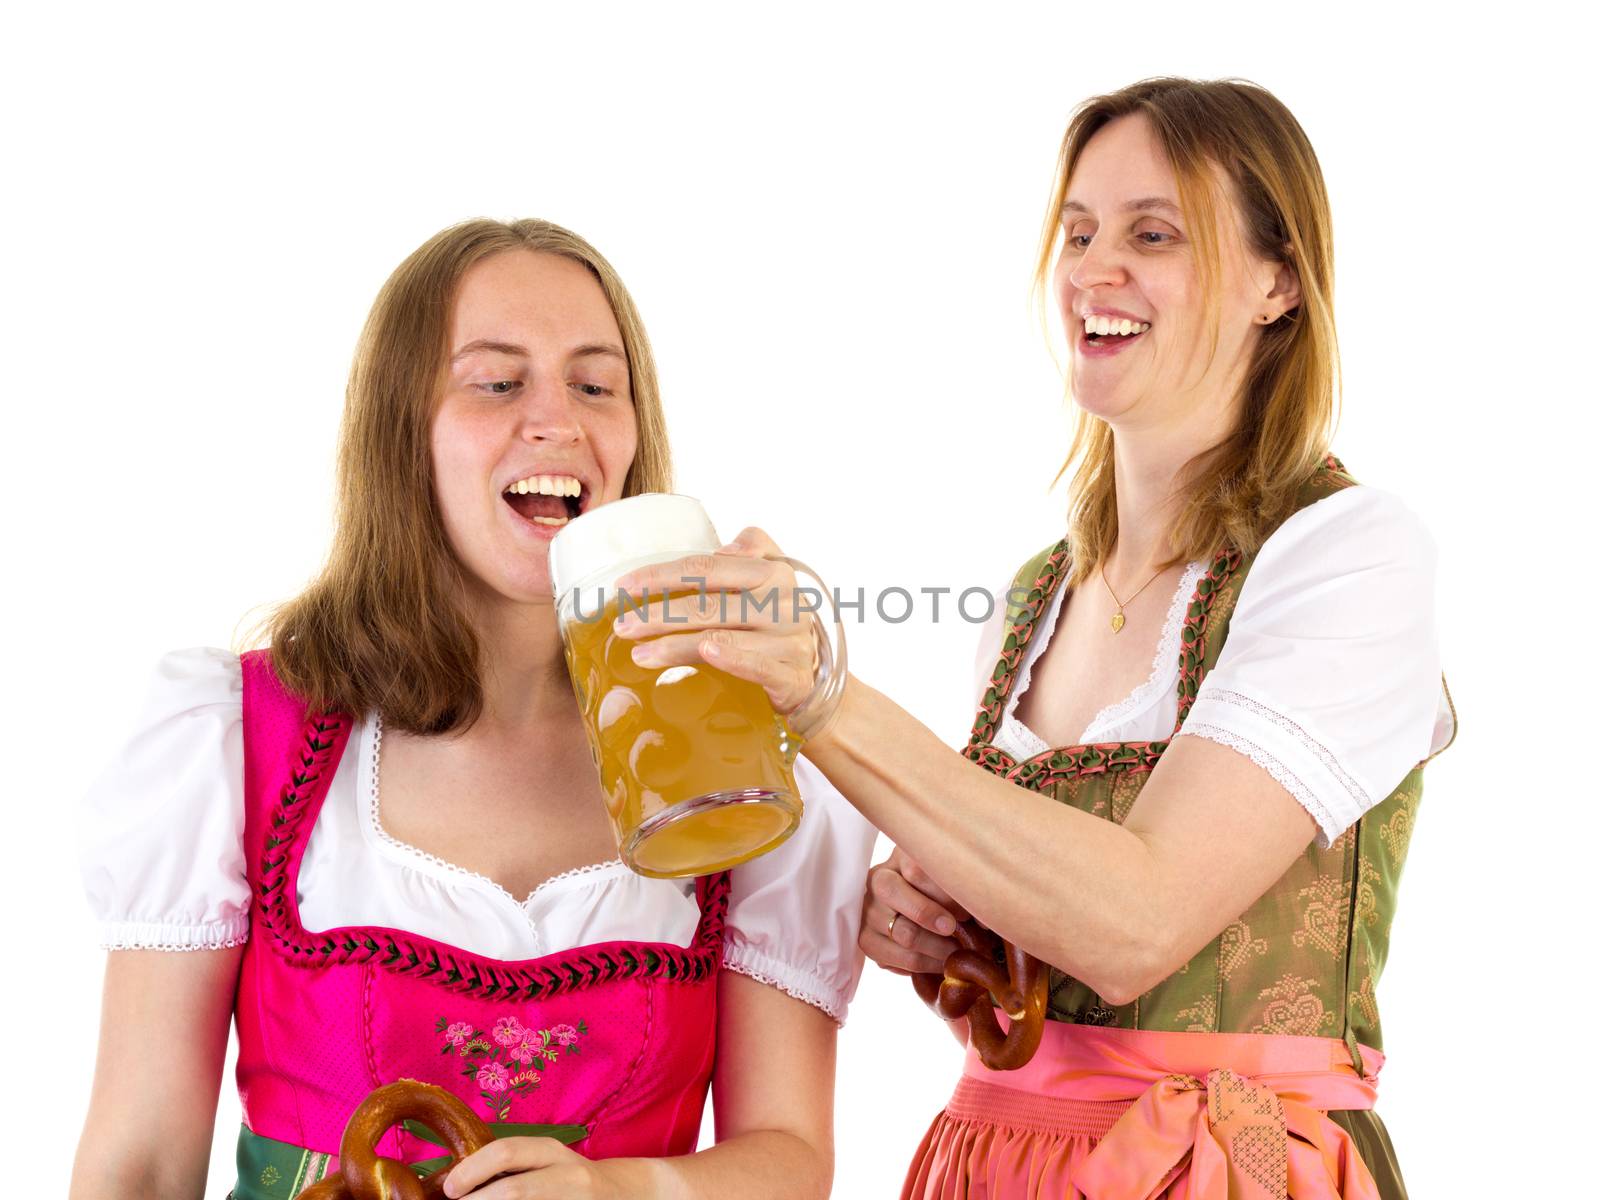 Tasting double beer at oktoberfest by gwolters